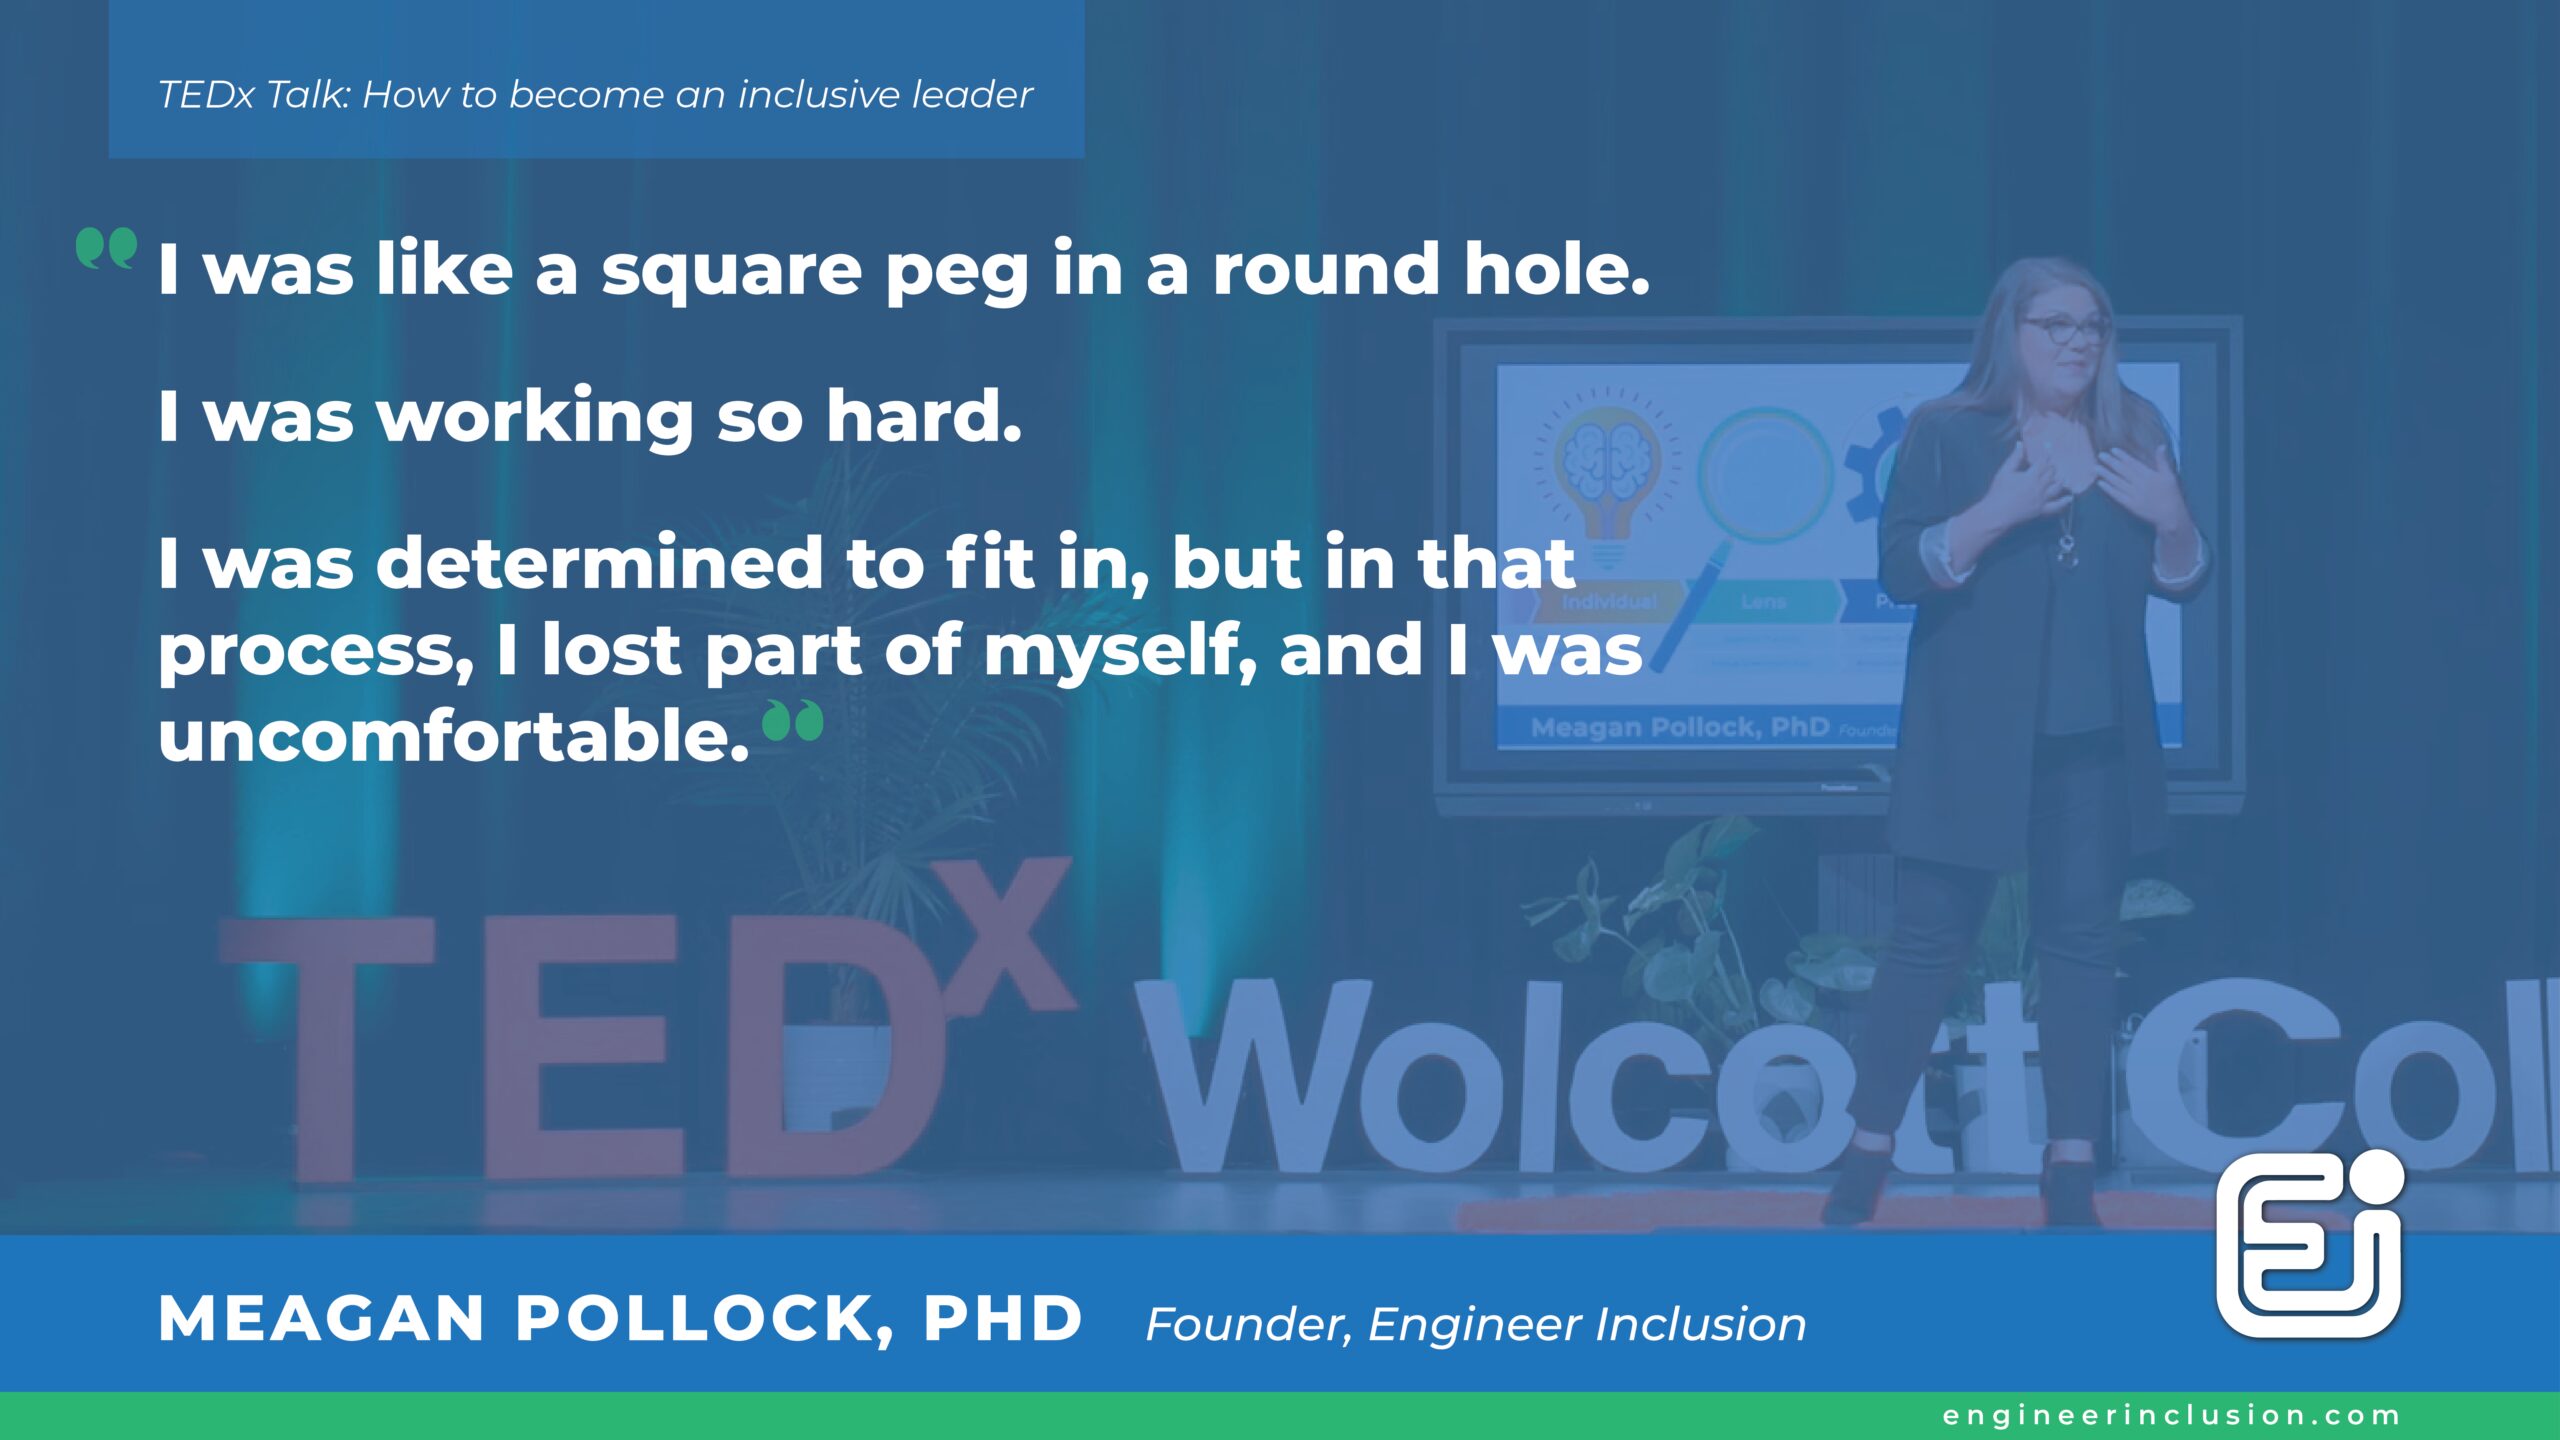 I was like a square peg in a round hole. I was working so hard. I was determined to fit in, but in that process, I lost part of myself, and I was uncomfortable. Dr. Meagan Pollock